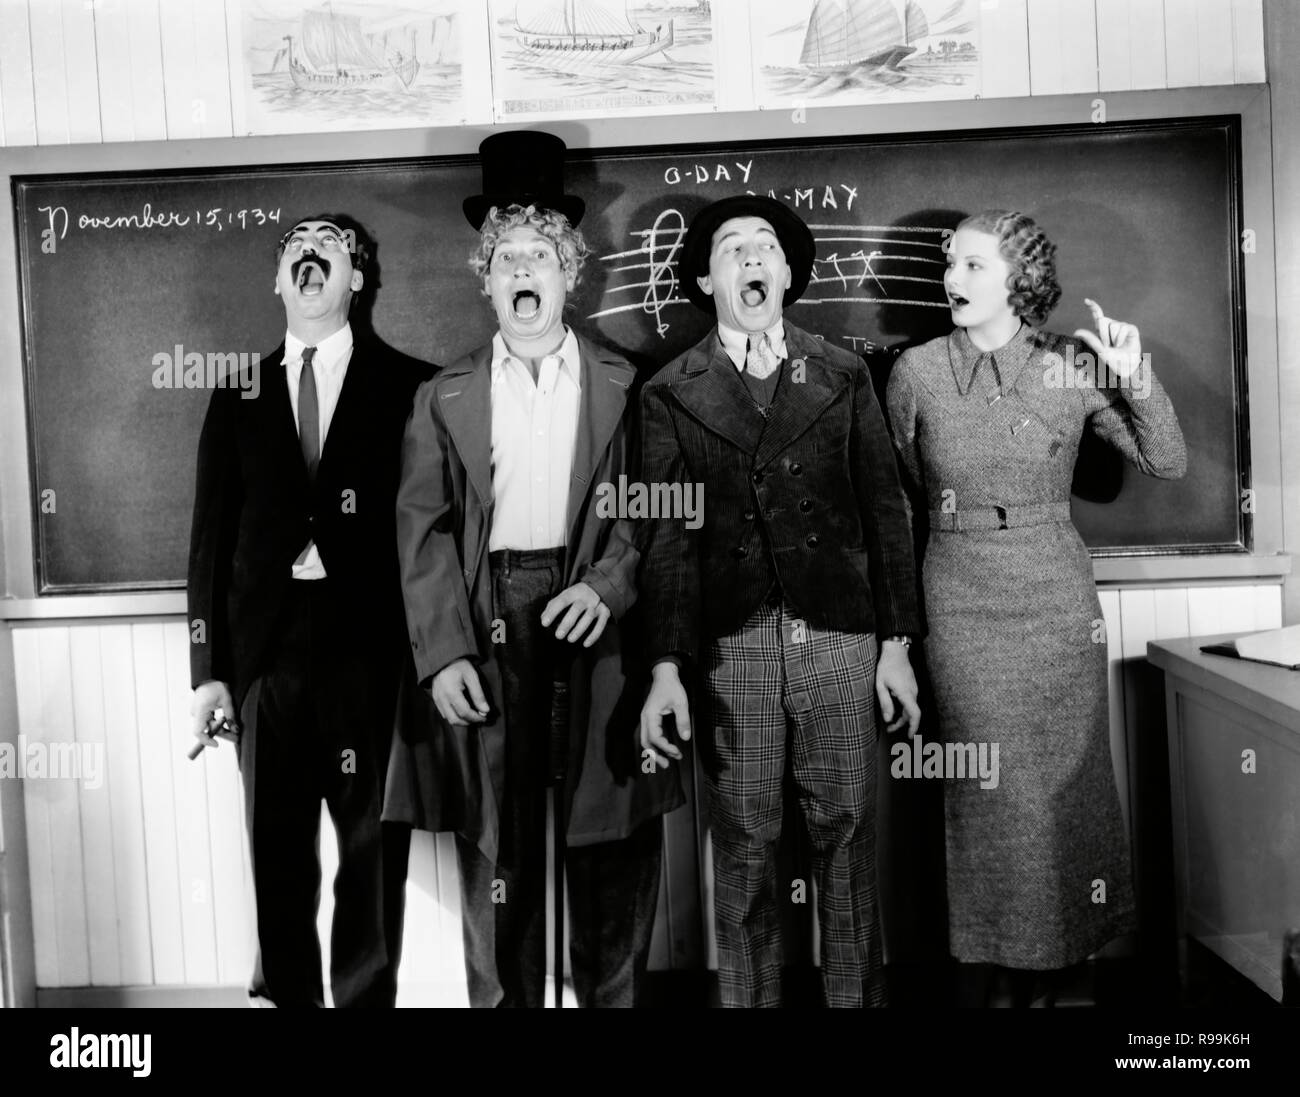 groucho marx brothers